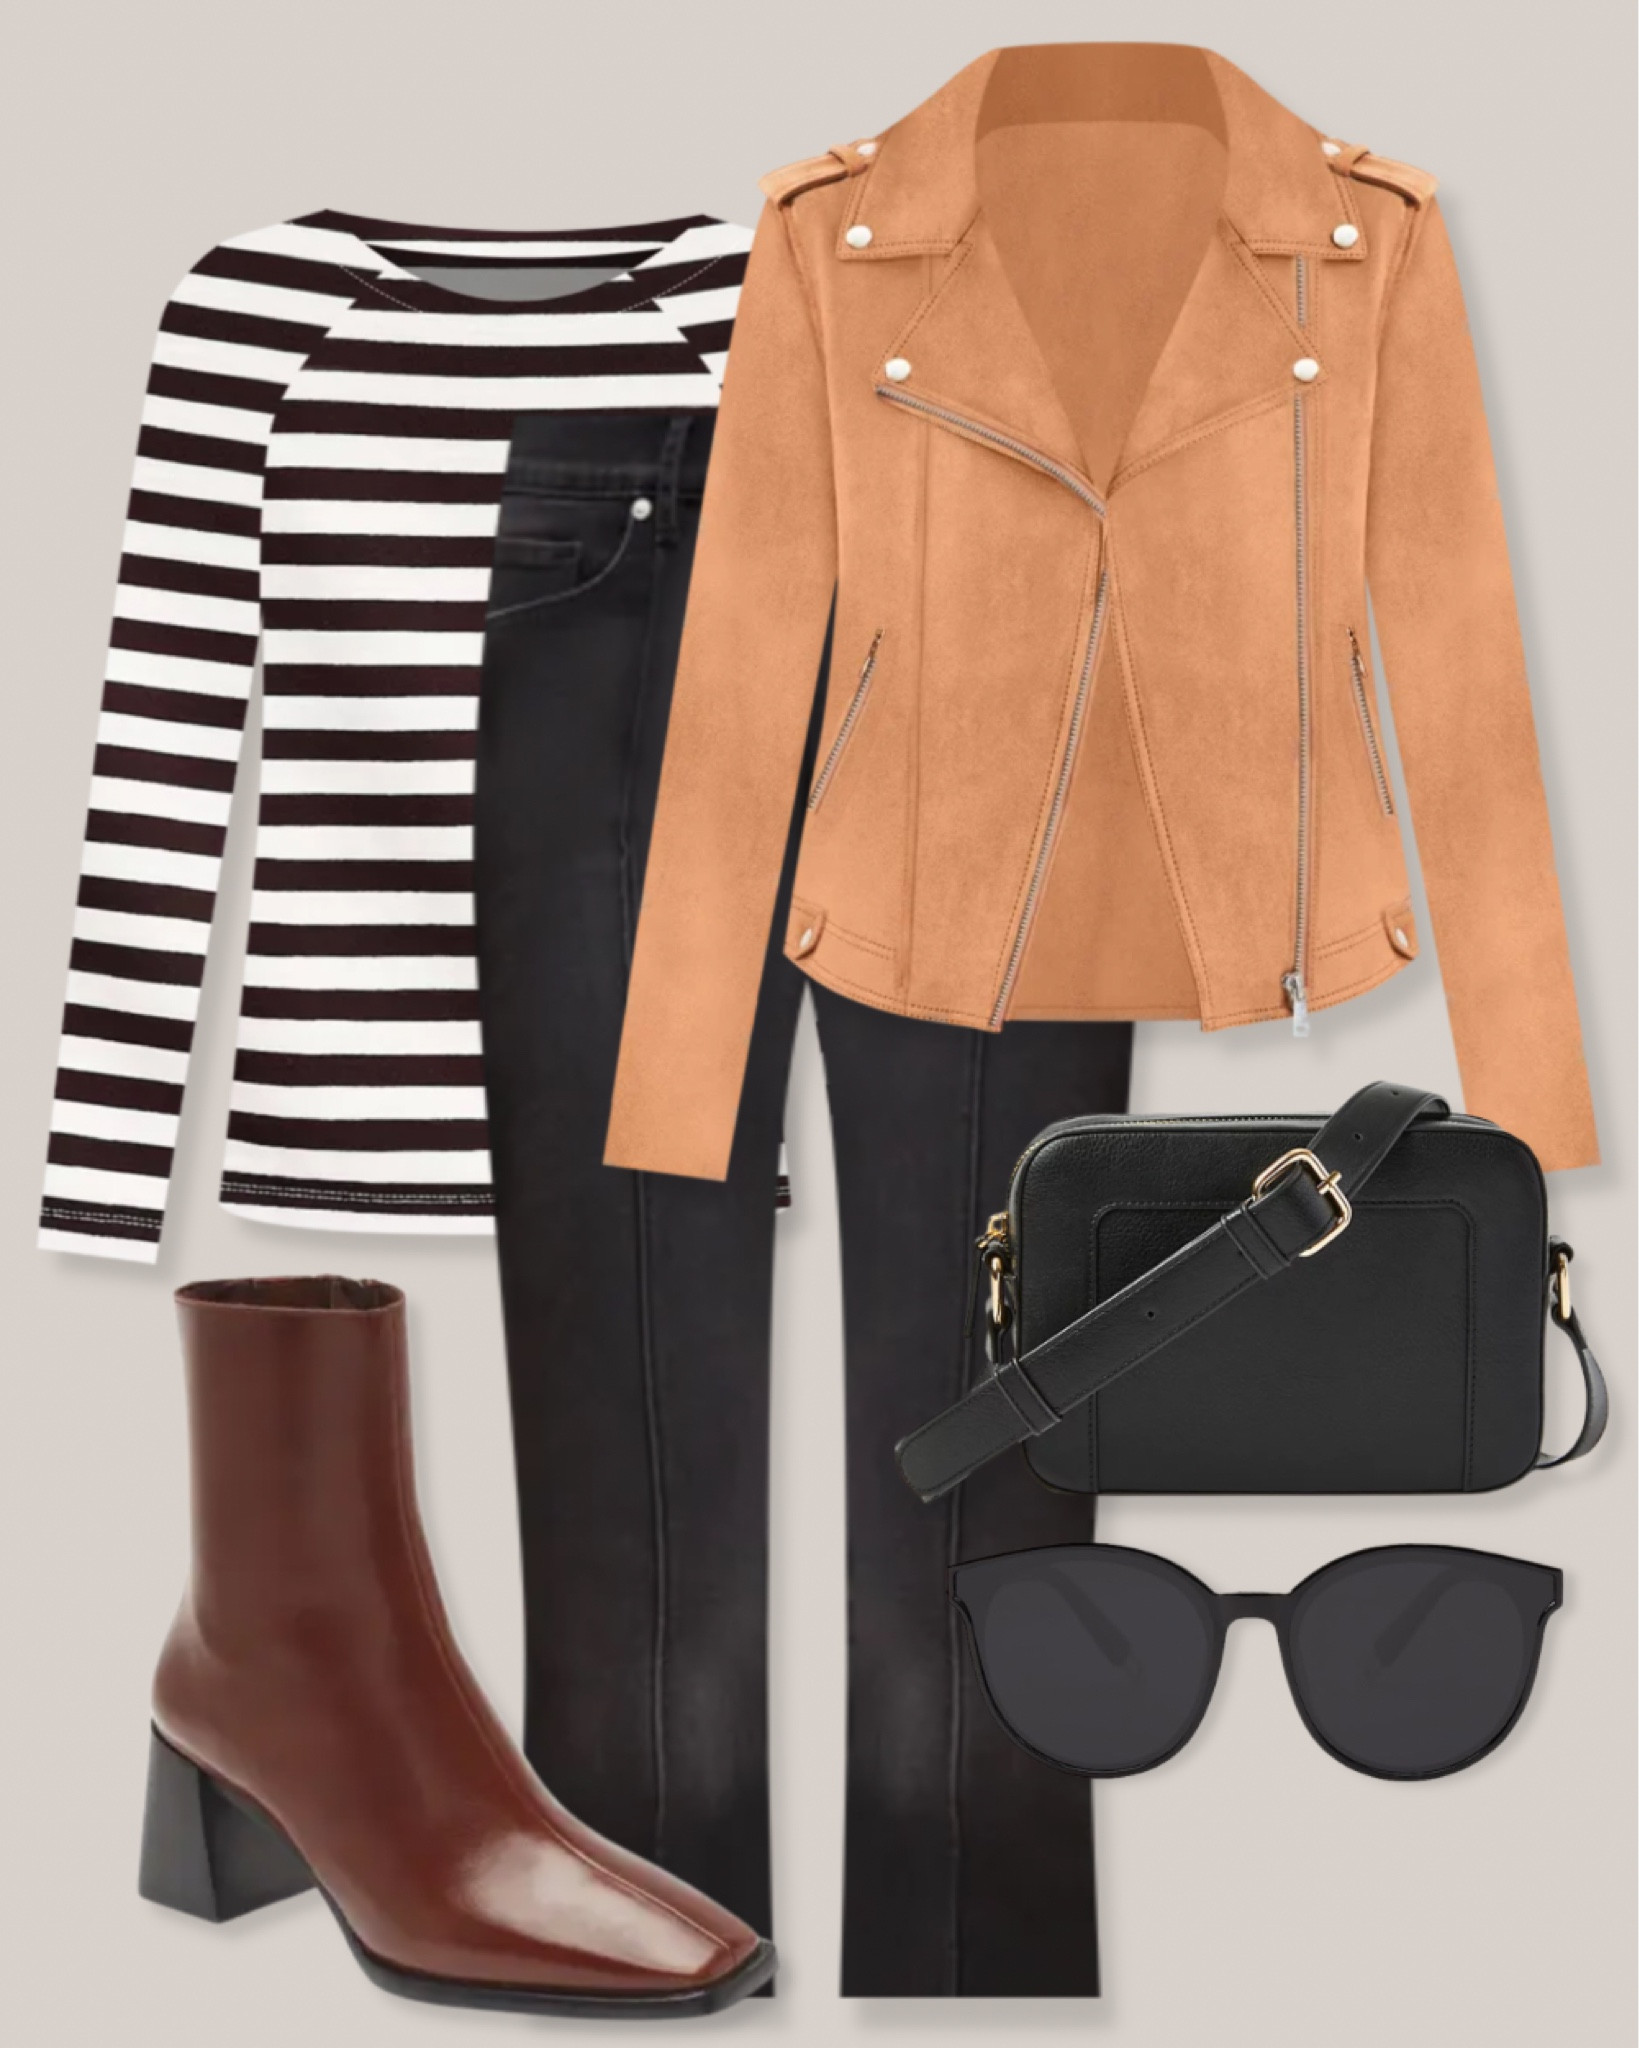 Black Leather Biker Jacket with Suede Leggings Outfits (2 ideas & outfits)